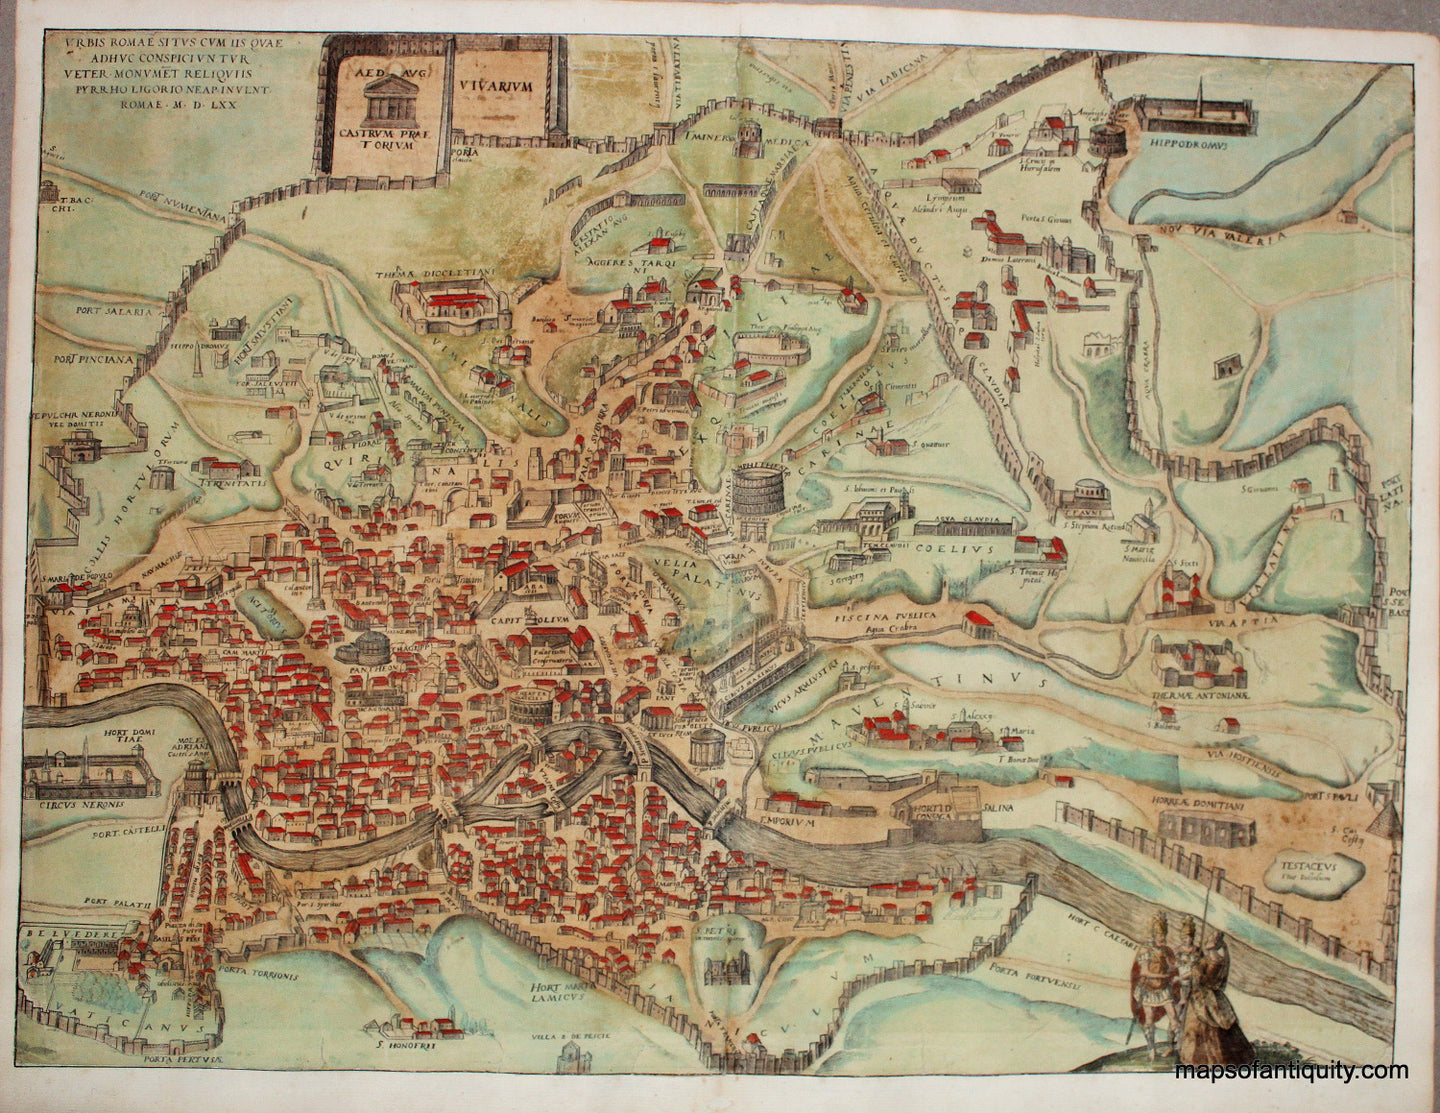 Antique-Hand-Colored-Map-Bird's-Eye-View-of-Rome-Italy-**********-Europe-Italy-1570-Braun-&-Hogenberg-Maps-Of-Antiquity